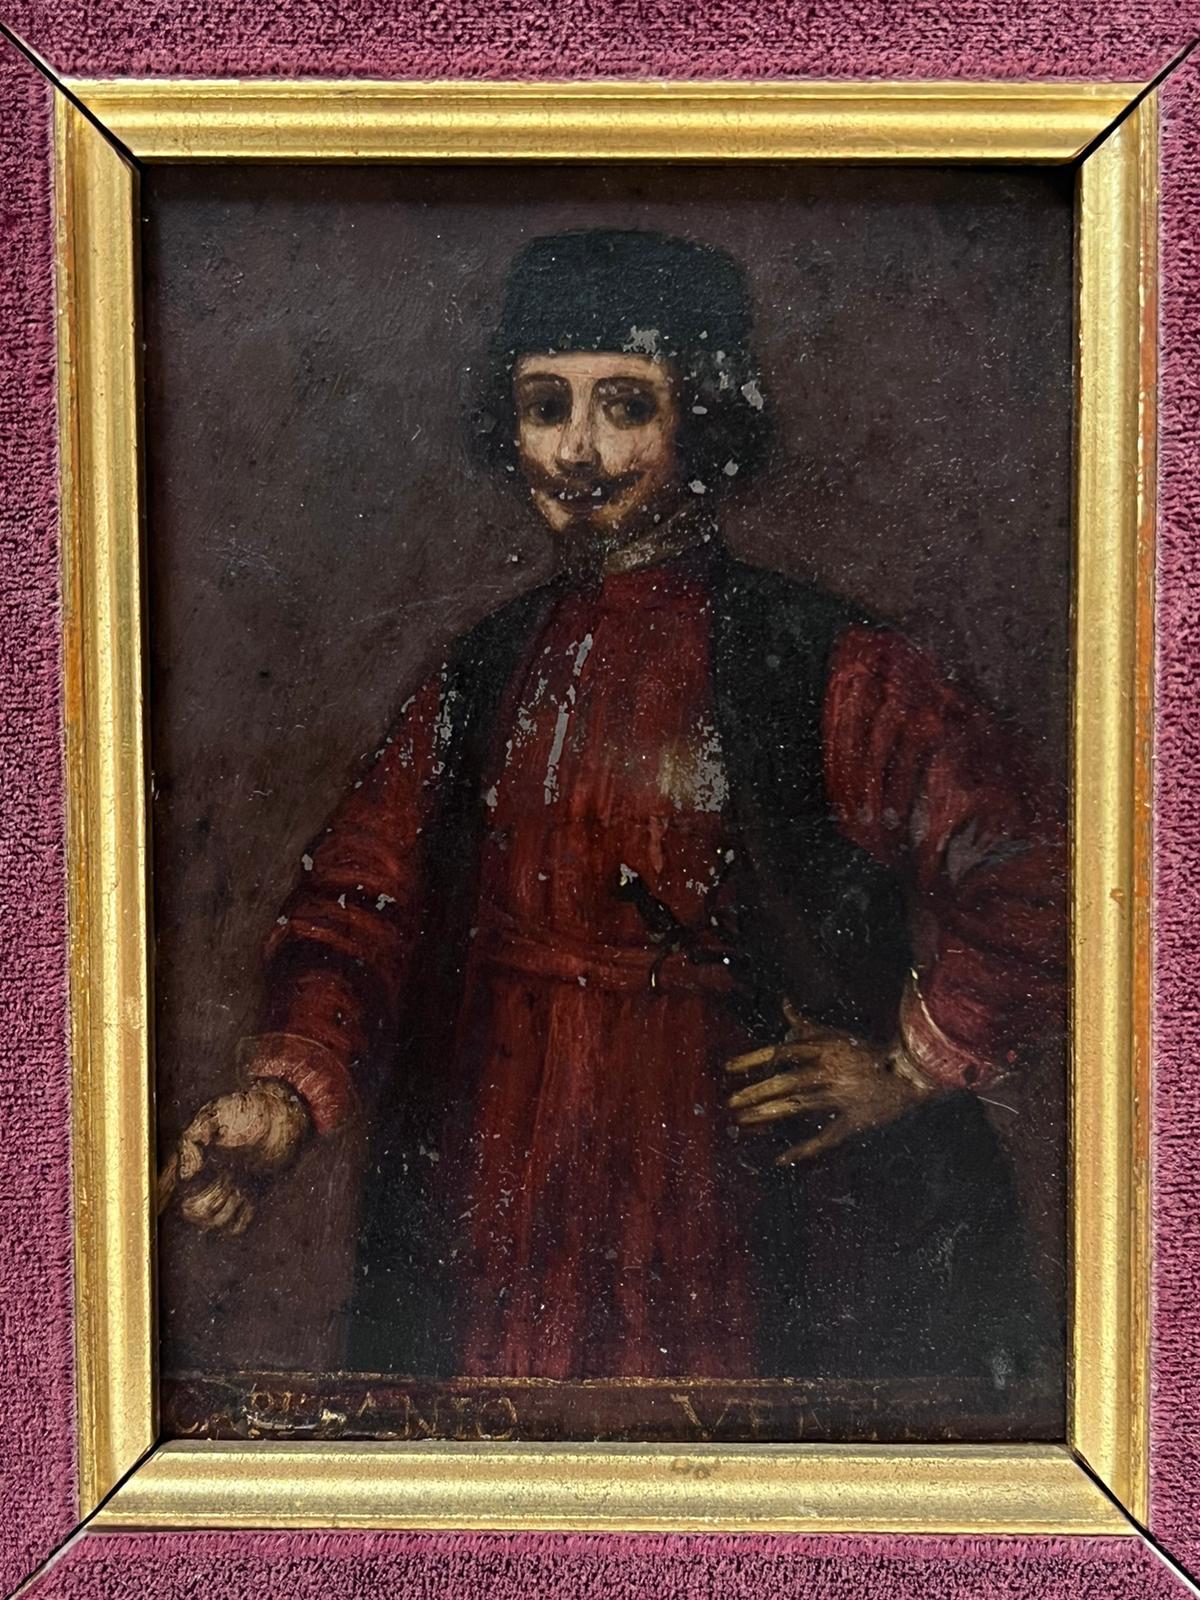 A Venetian Gentleman
18th Century Venetian School
oil painting on board, framed
framed: 7.25 x 6 inches
board: 5.25 x 4 inches 
provenance: private collection, UK
condition: sound but with some paint loss and old scuffs. 
